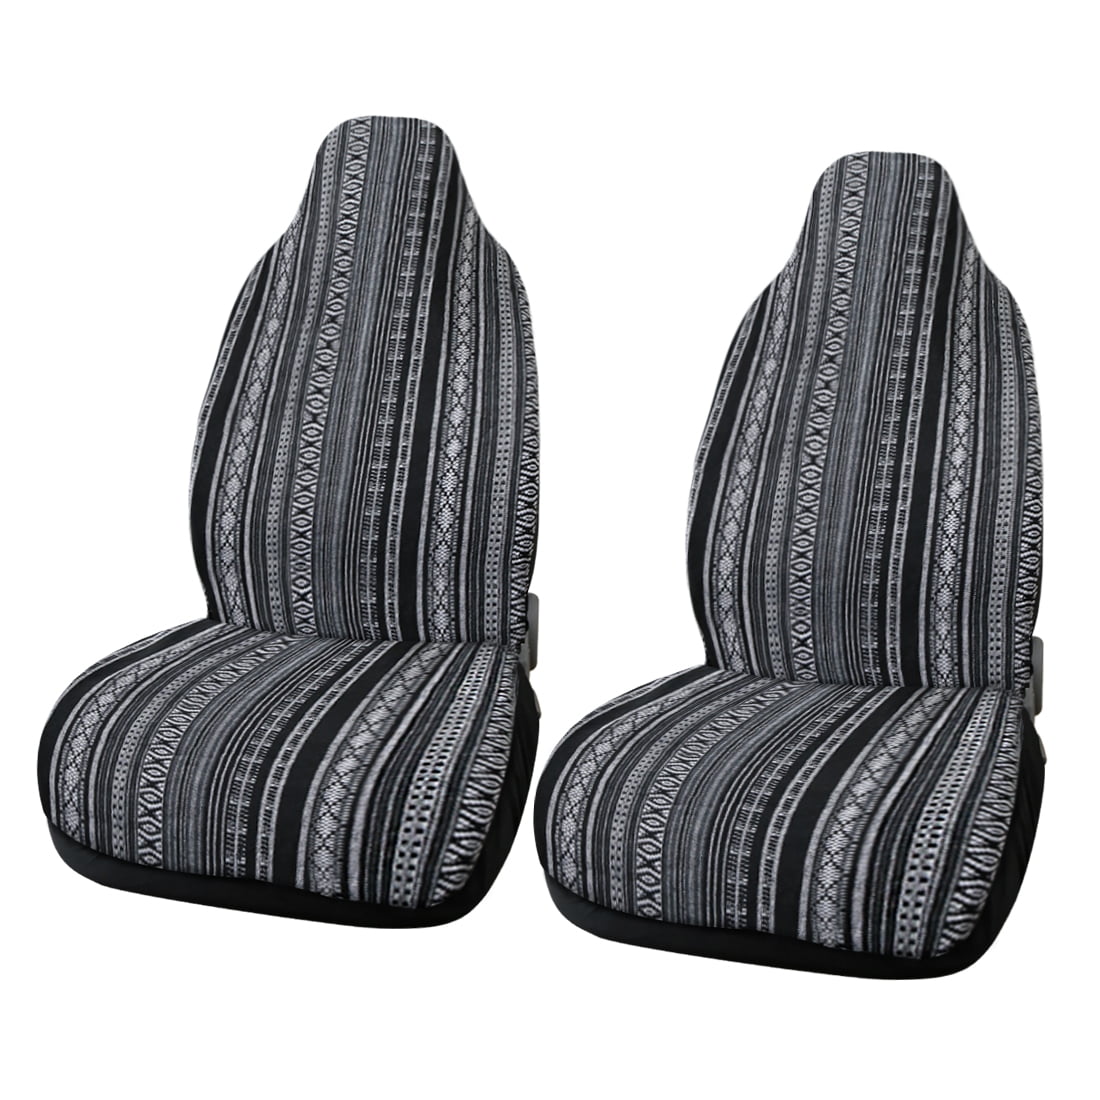 Airbag Compatible PICAUTO Baja Blanket Bucket Seat Cover for Car SUV 2PCS Truck Van PIC AUTO 